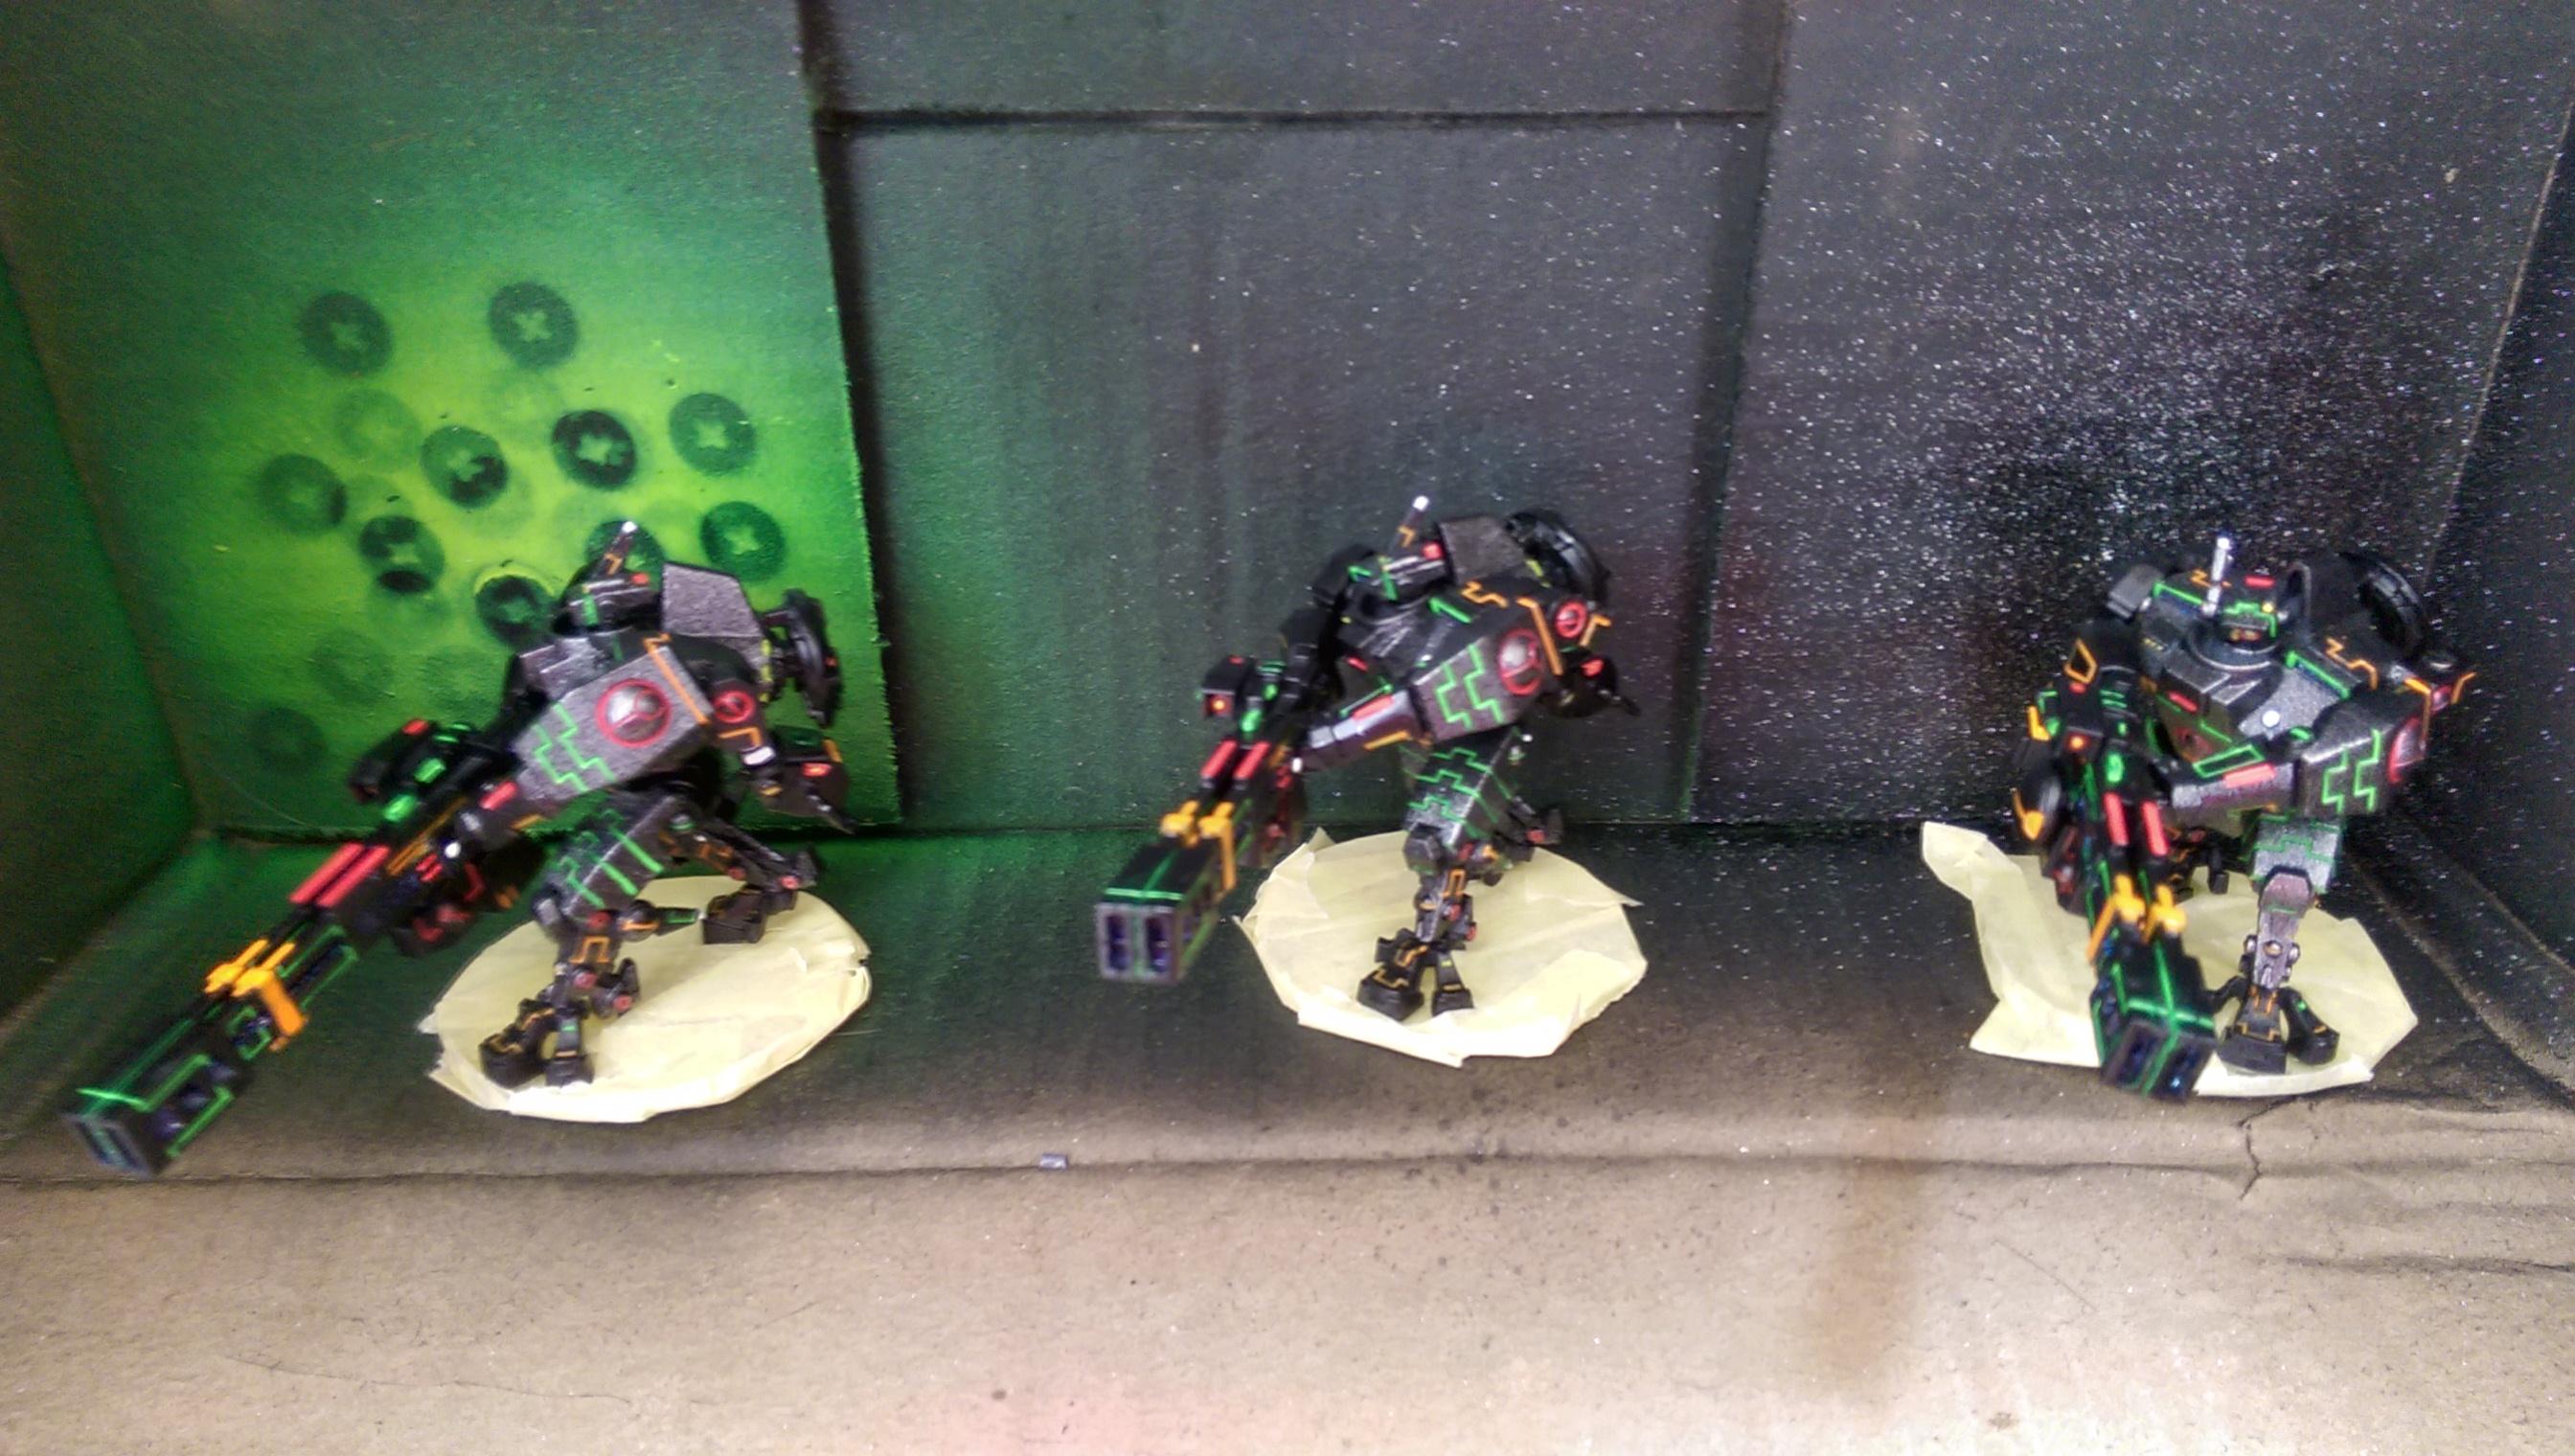 Amry, Empire, Missile, Neon, Objective Marker, Sides, Tau, Tron, Warhammer 40,000